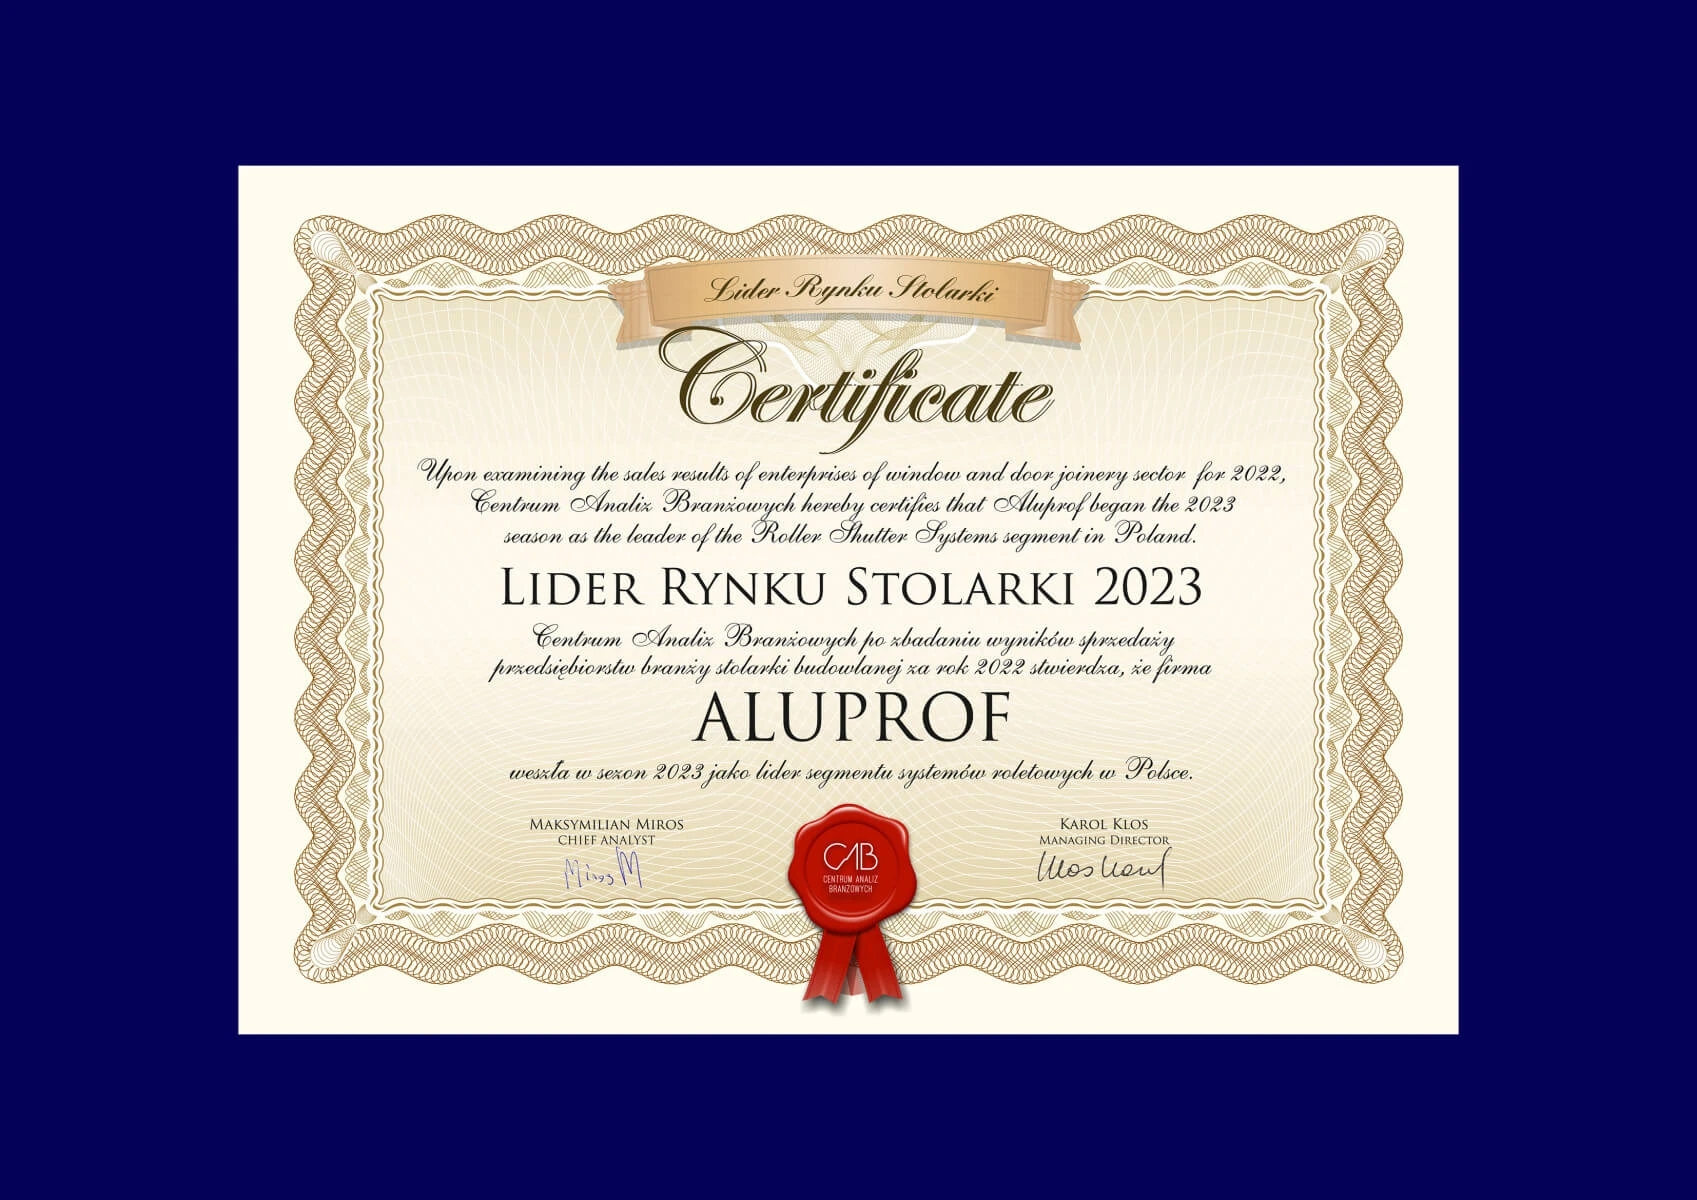 Leader of the Roller Shutter Systems segment in Poland 2023